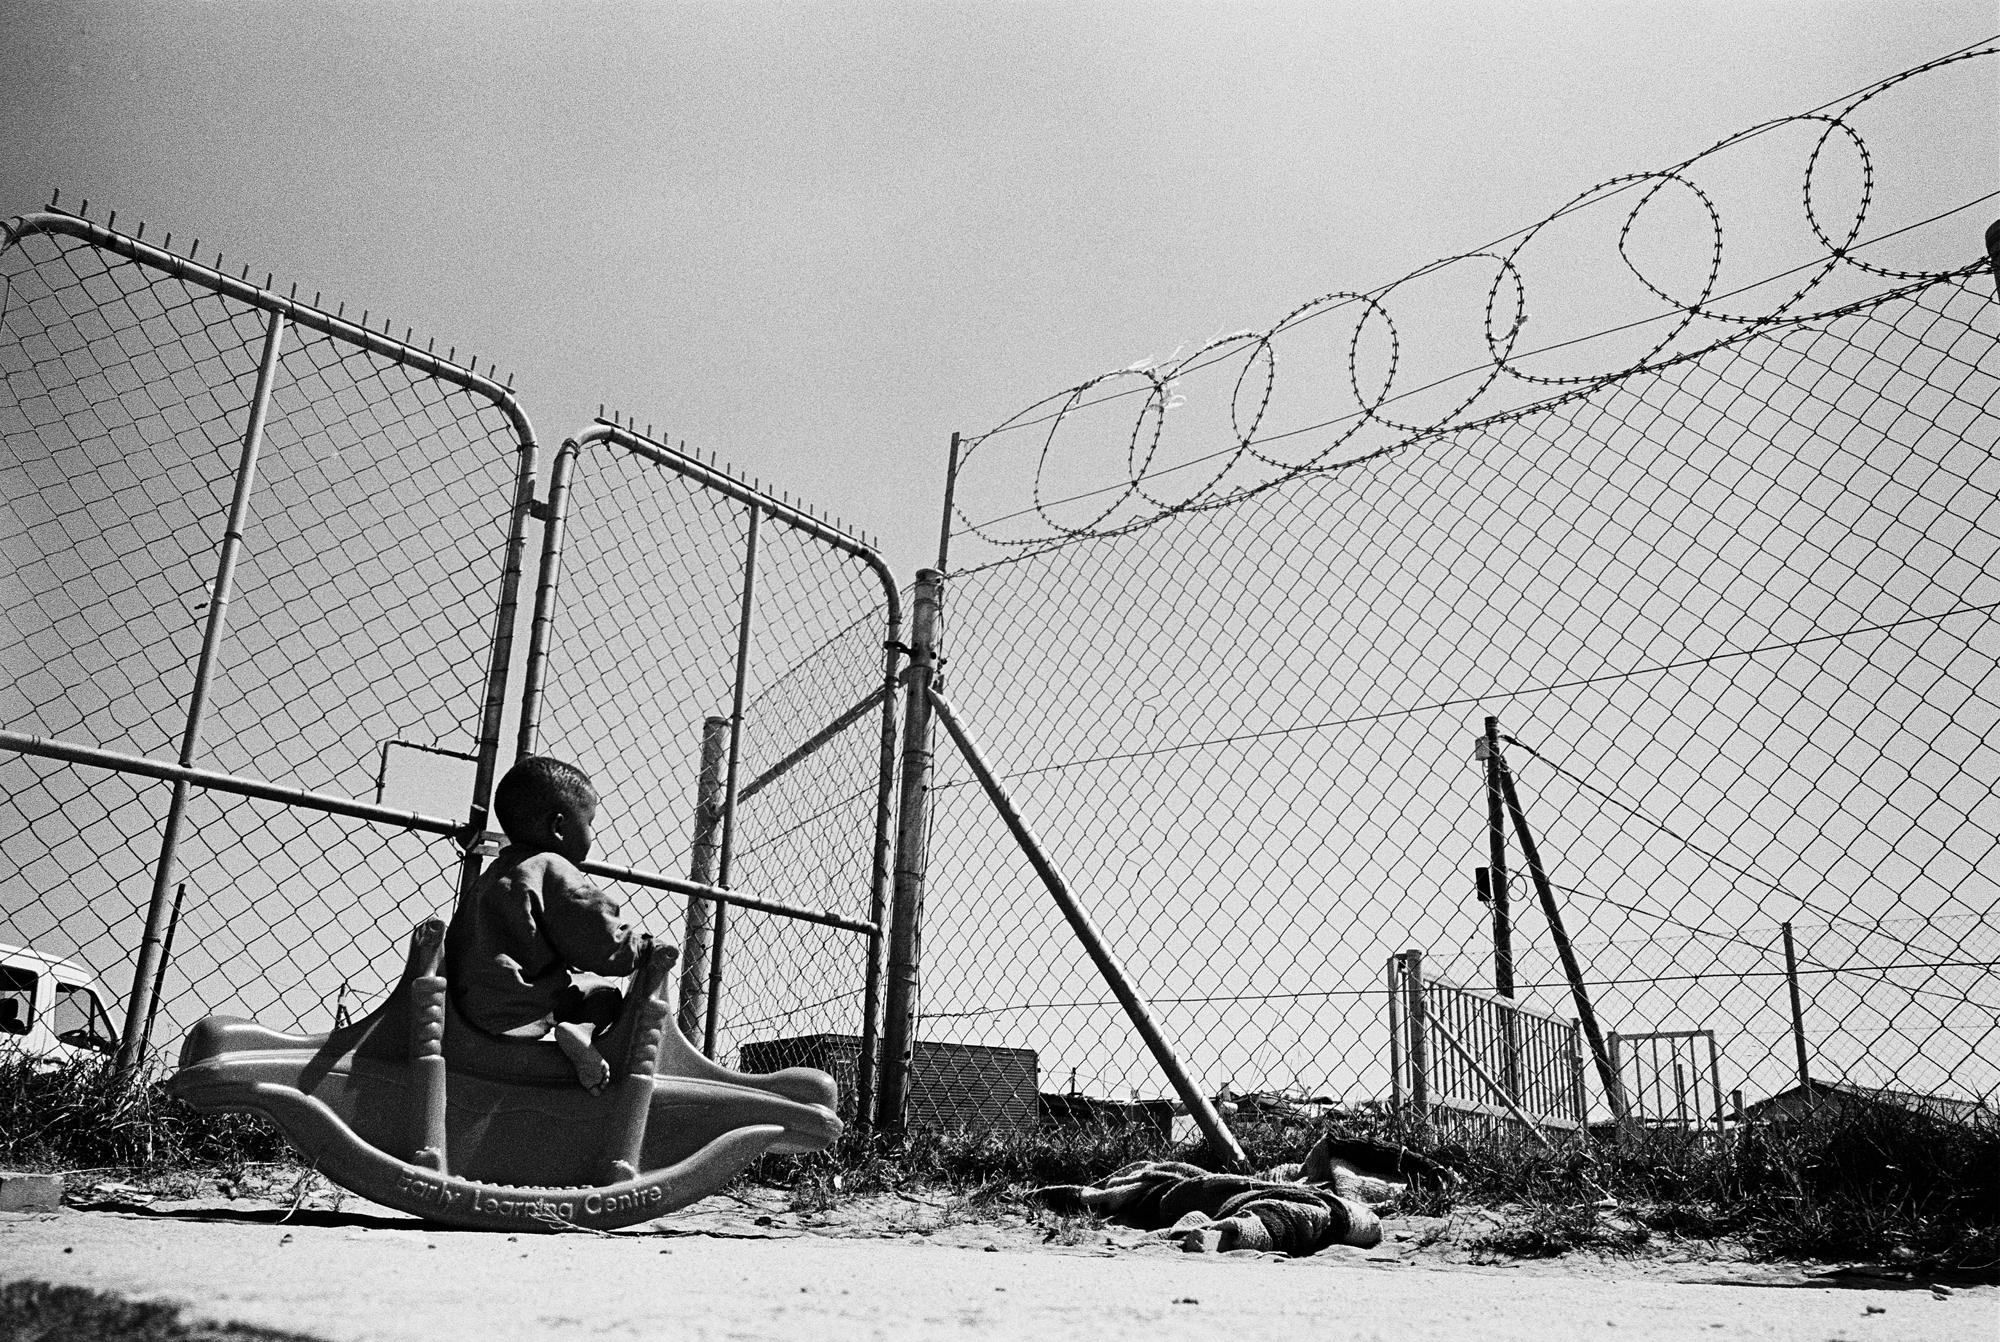 South Africa - SOUTH AFRICA Khayelitsha Township, Cape Town An HIV...